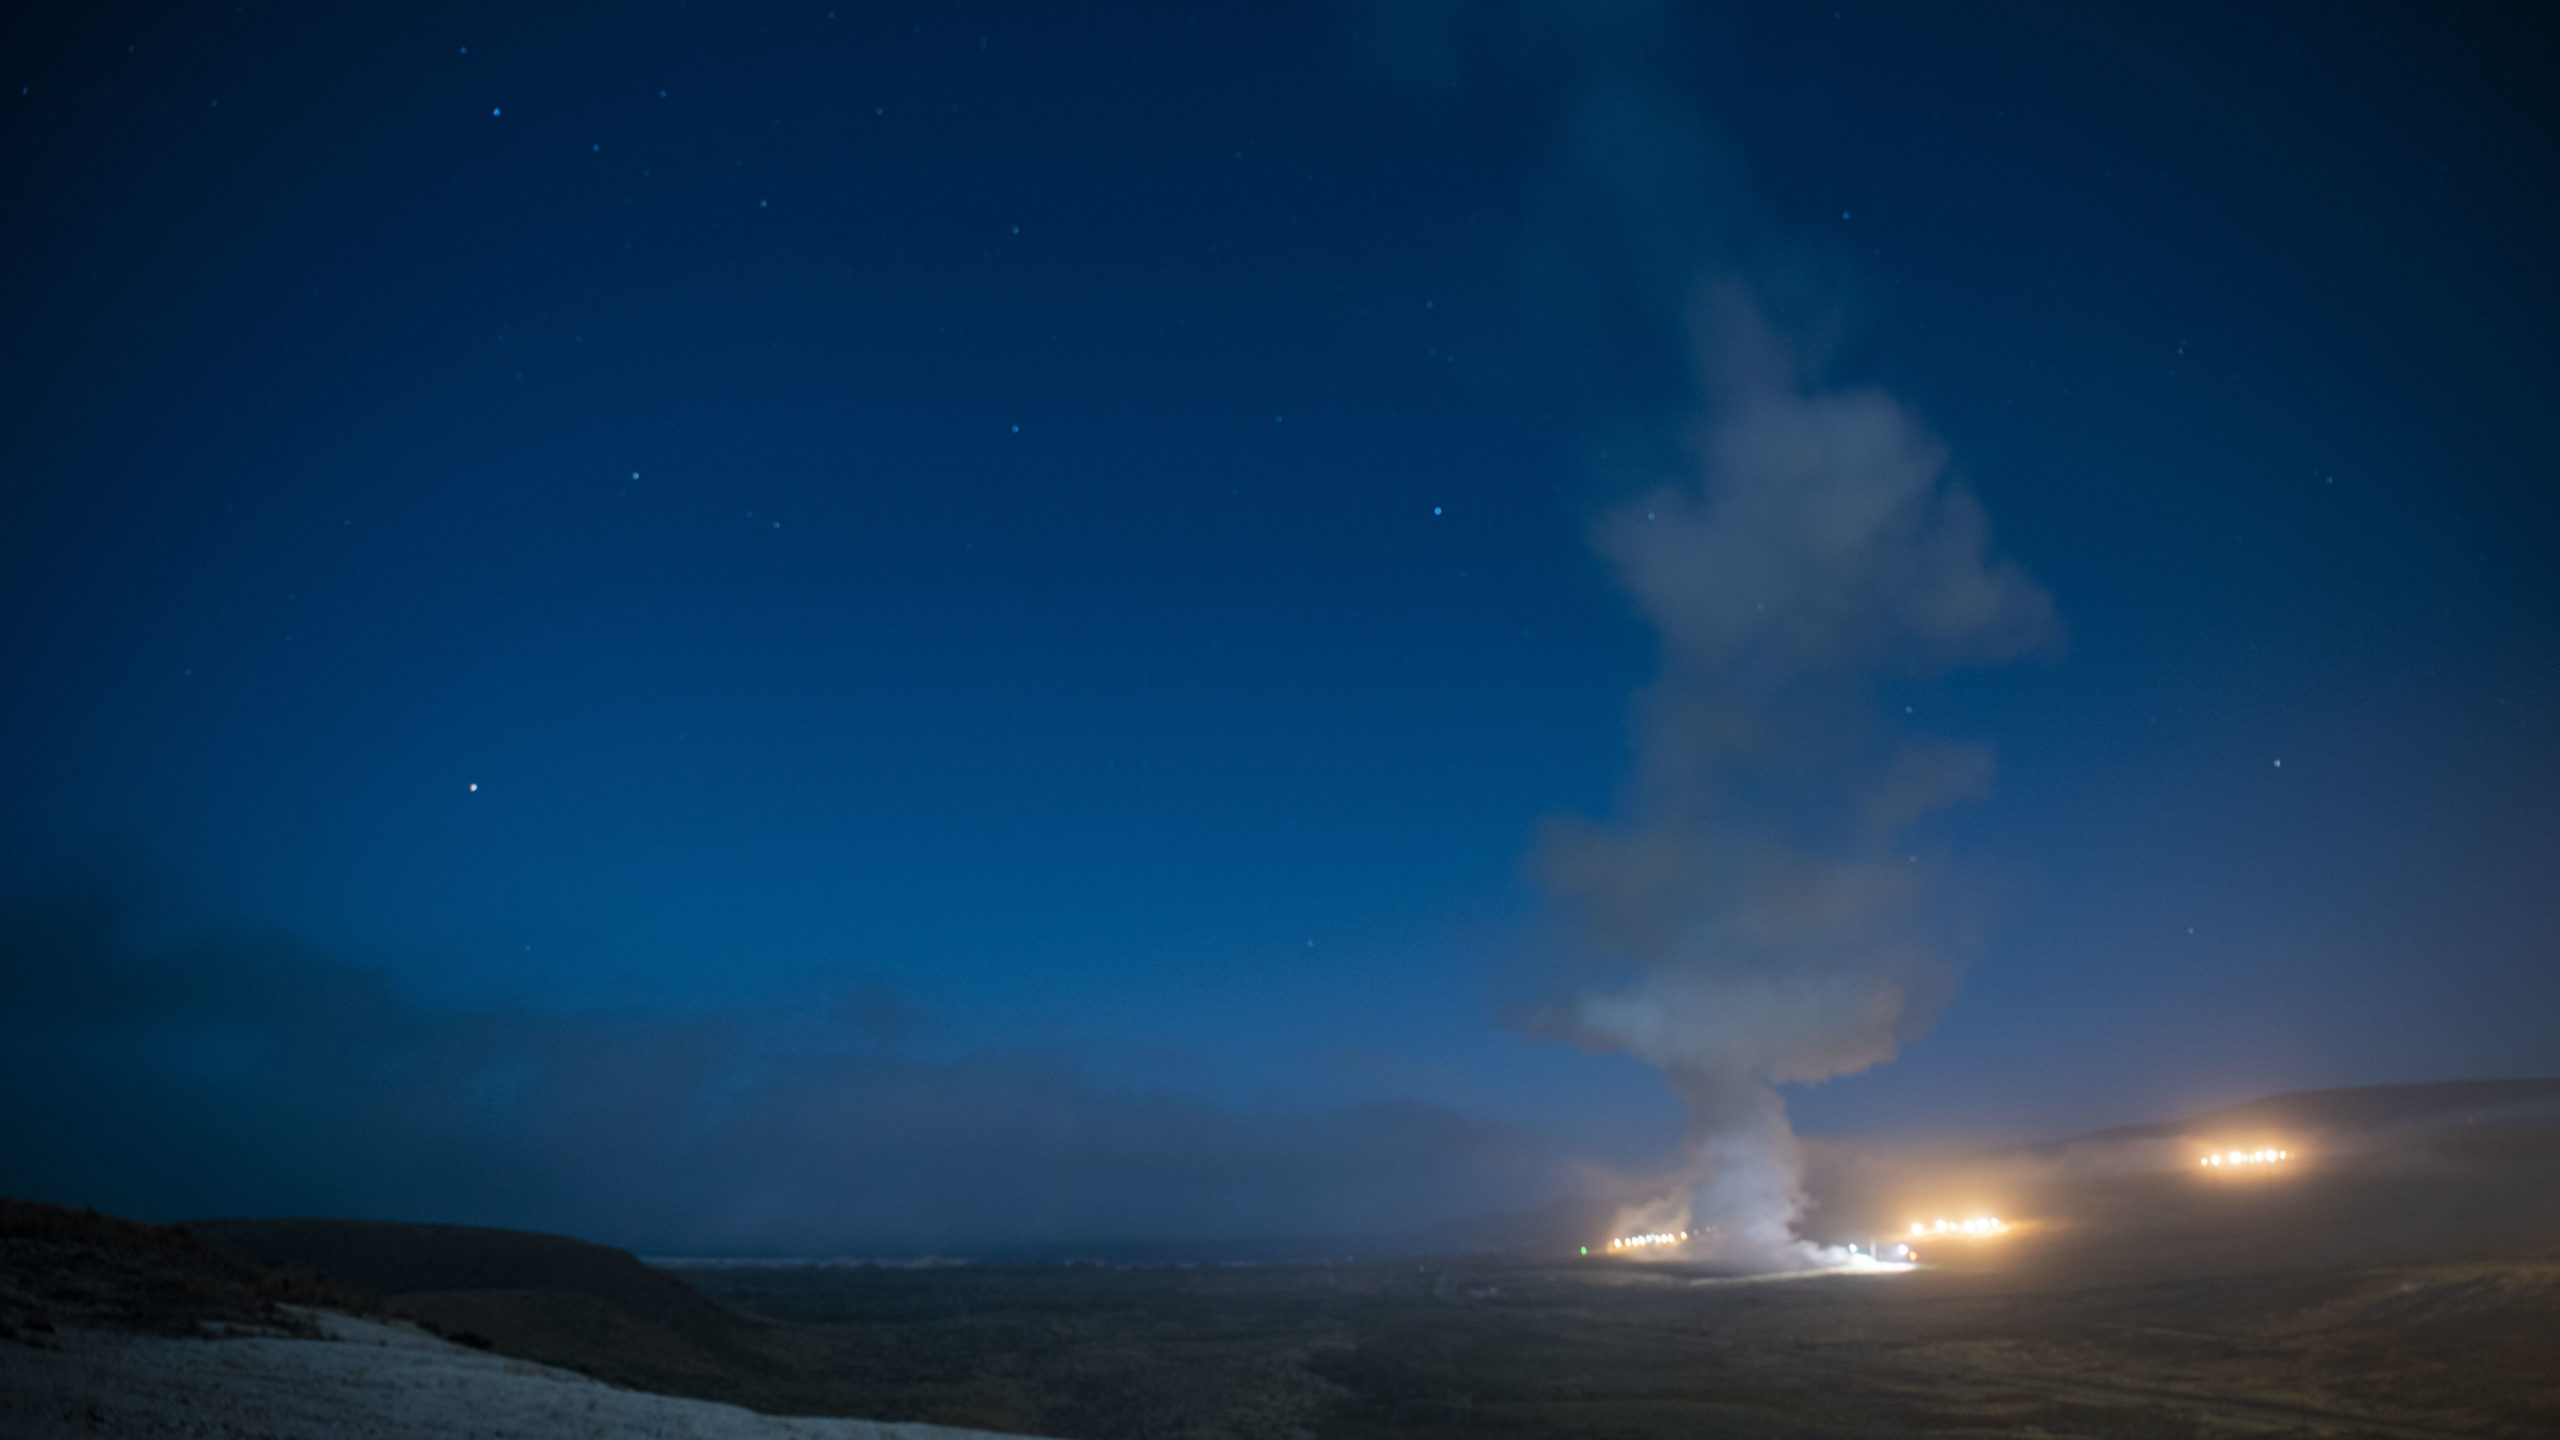 Minuteman III intercontinental ballistic missile launches during a test at 12:21 a.m. PT on August 4, 2020, at Vandenberg Air Force Base in California. (Photo: DVIDS/U.S. Air Force photo by Senior Airman Aubree Owens)